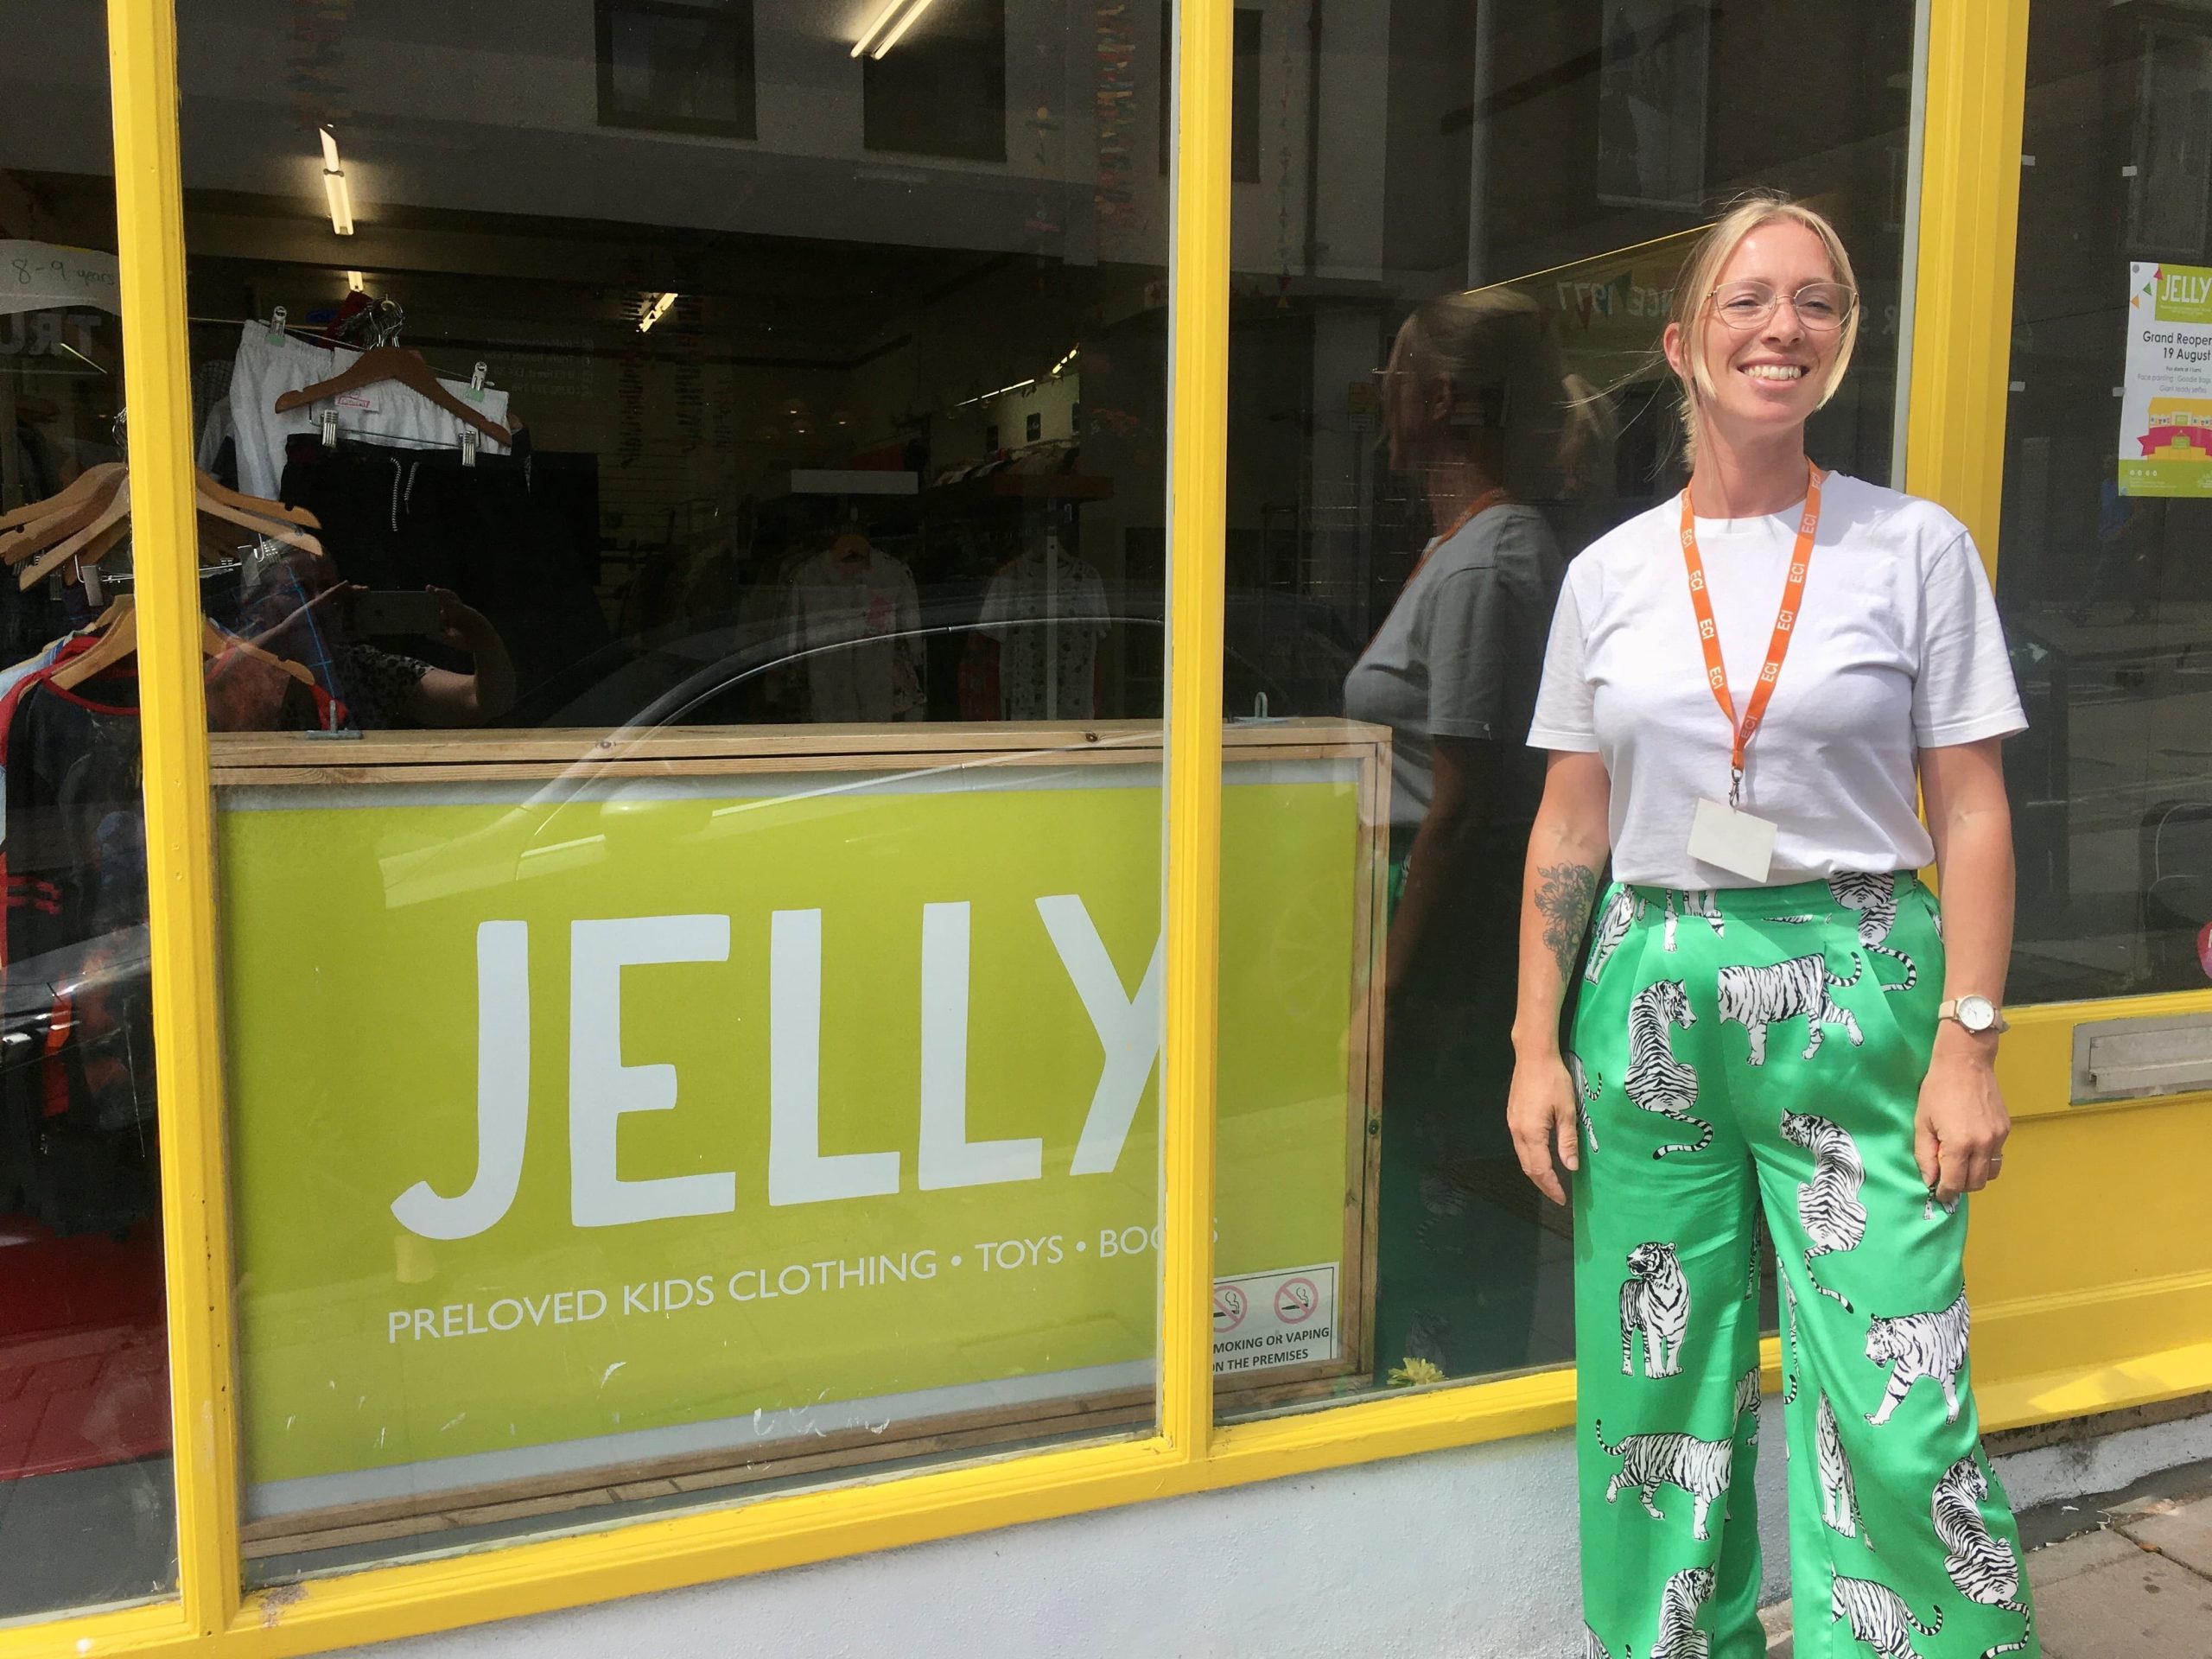 Jelly charity shop plans fun-packed day for grand opening!